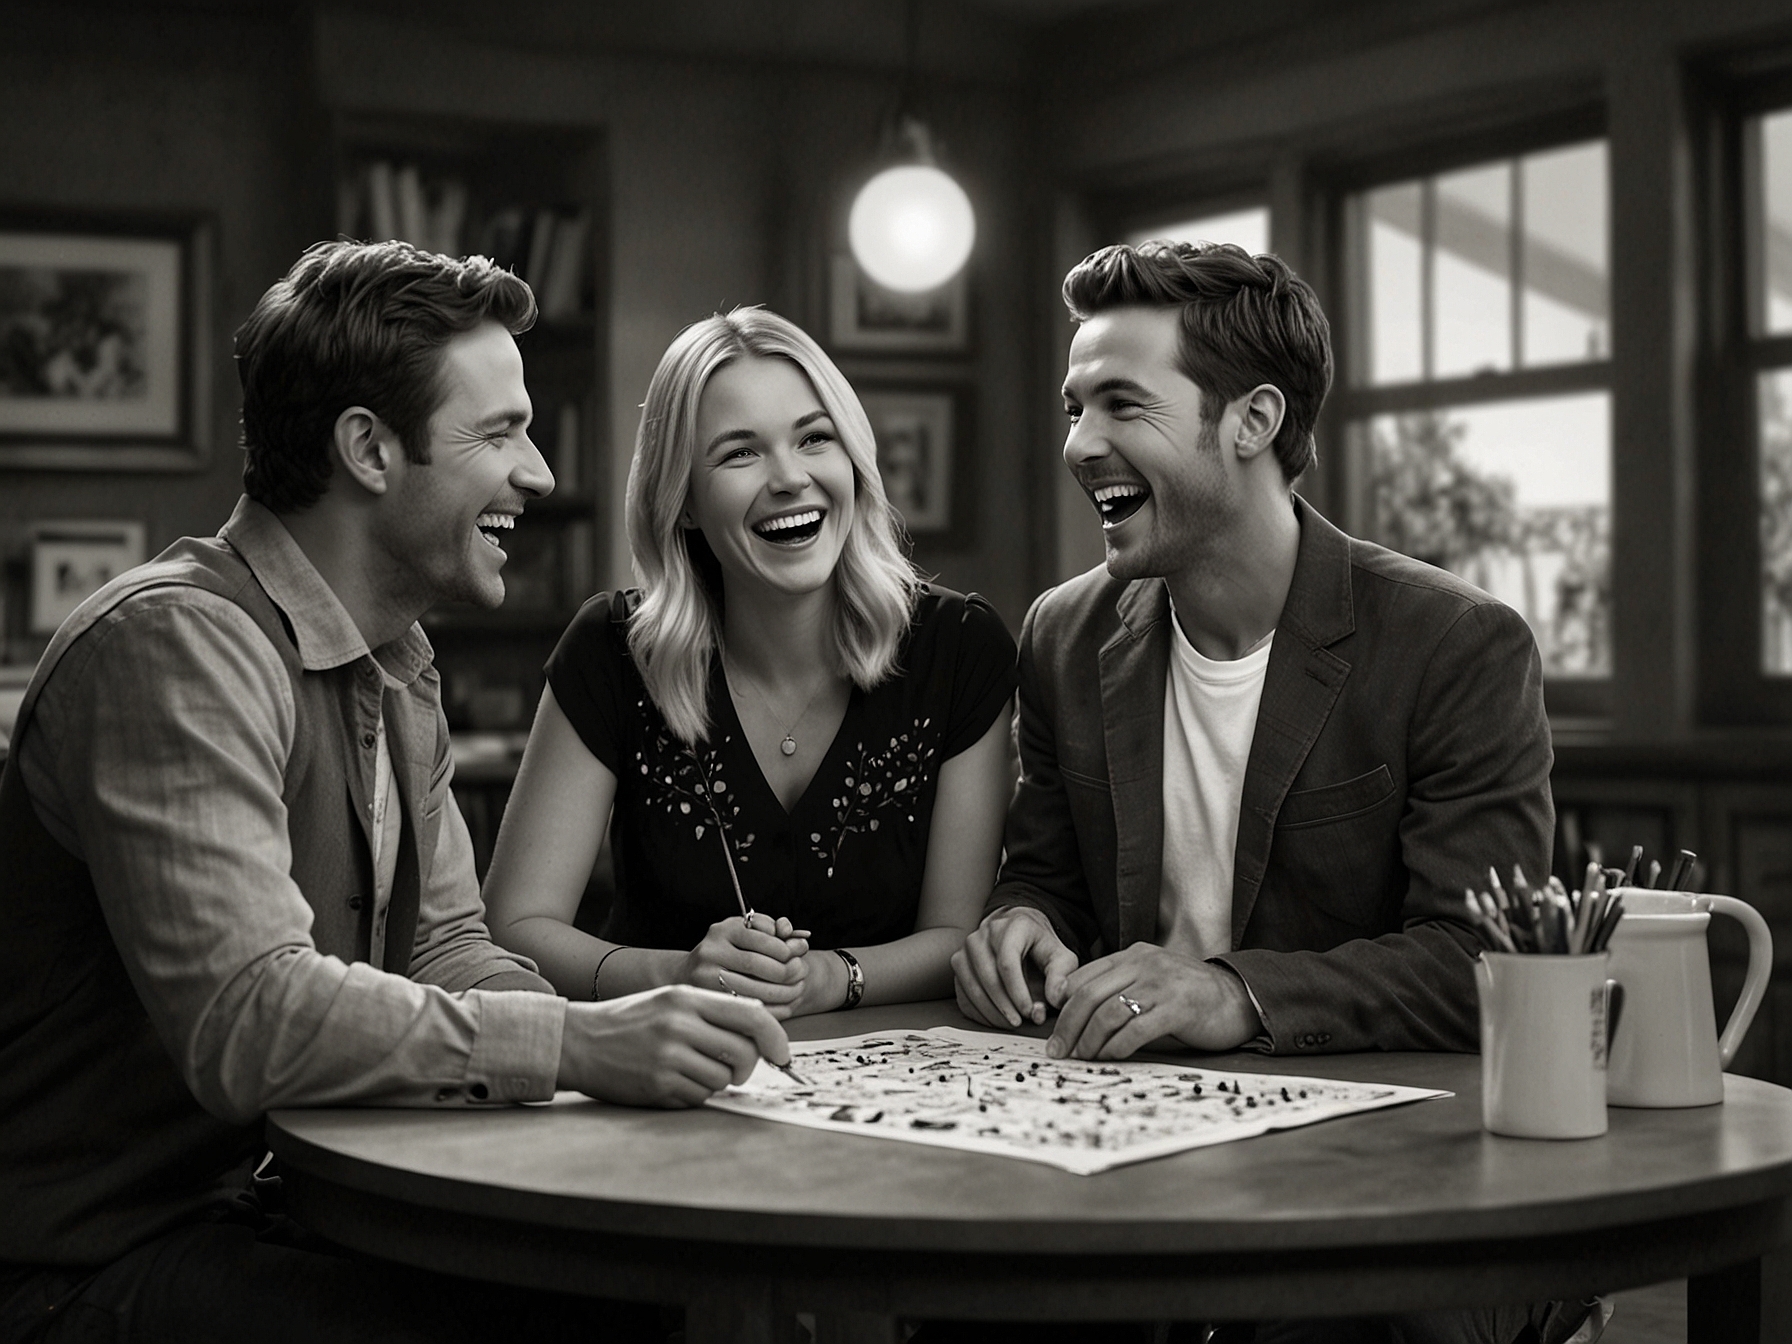 The 'Good Partner' cast members share a lighthearted moment on 'Amazing Saturday,' laughing and engaging in a fun game as they decipher song lyrics, showcasing their chemistry.